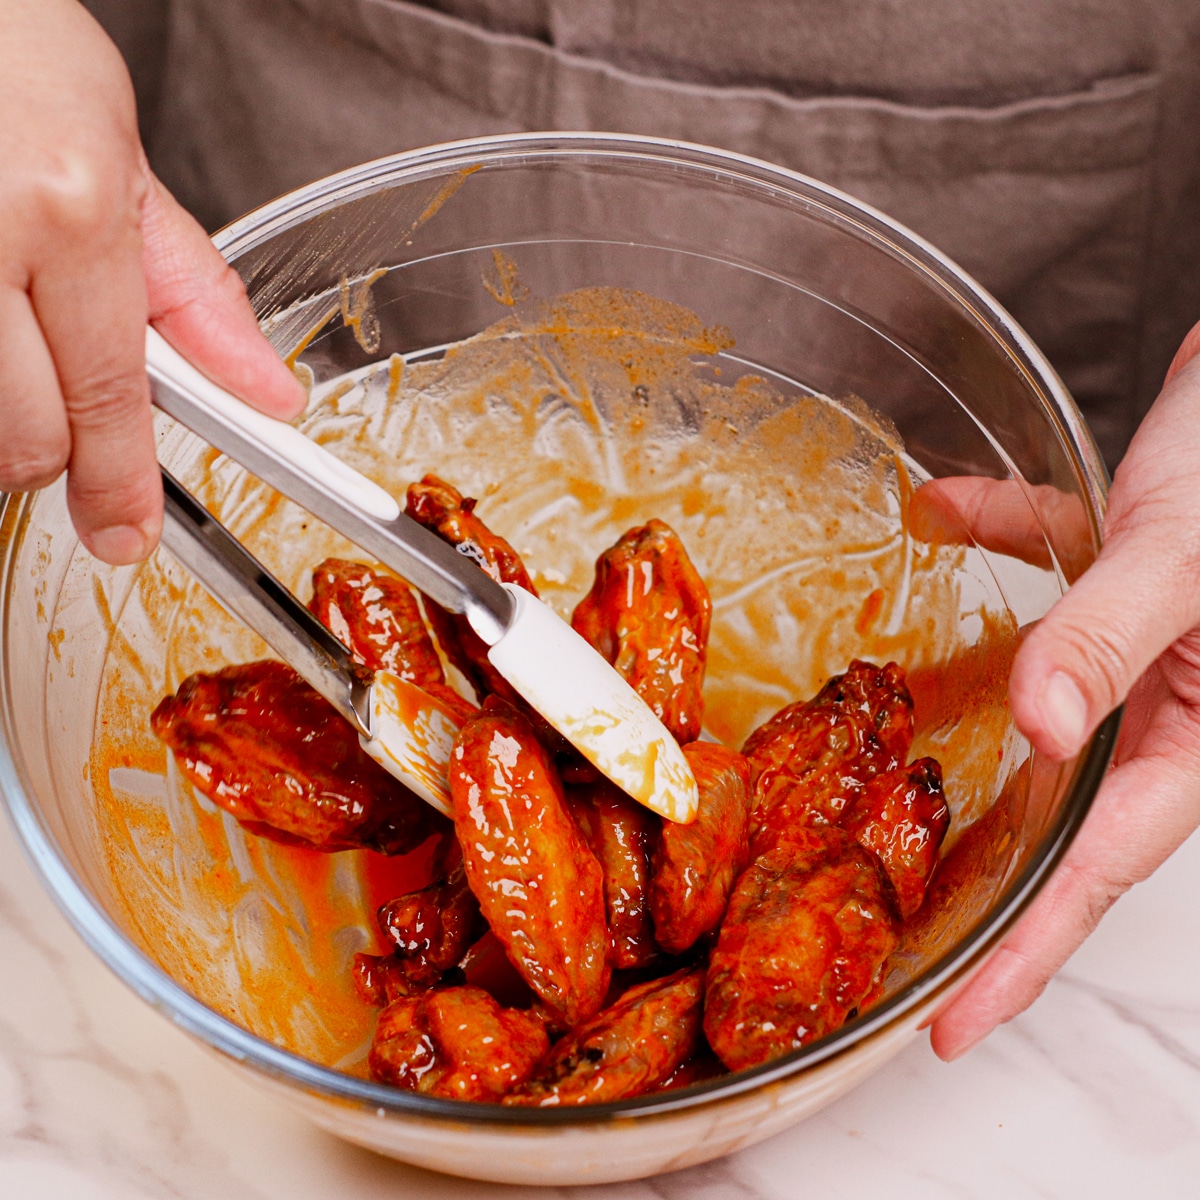 Coating air fried chicken wings with Buffalo sauce.